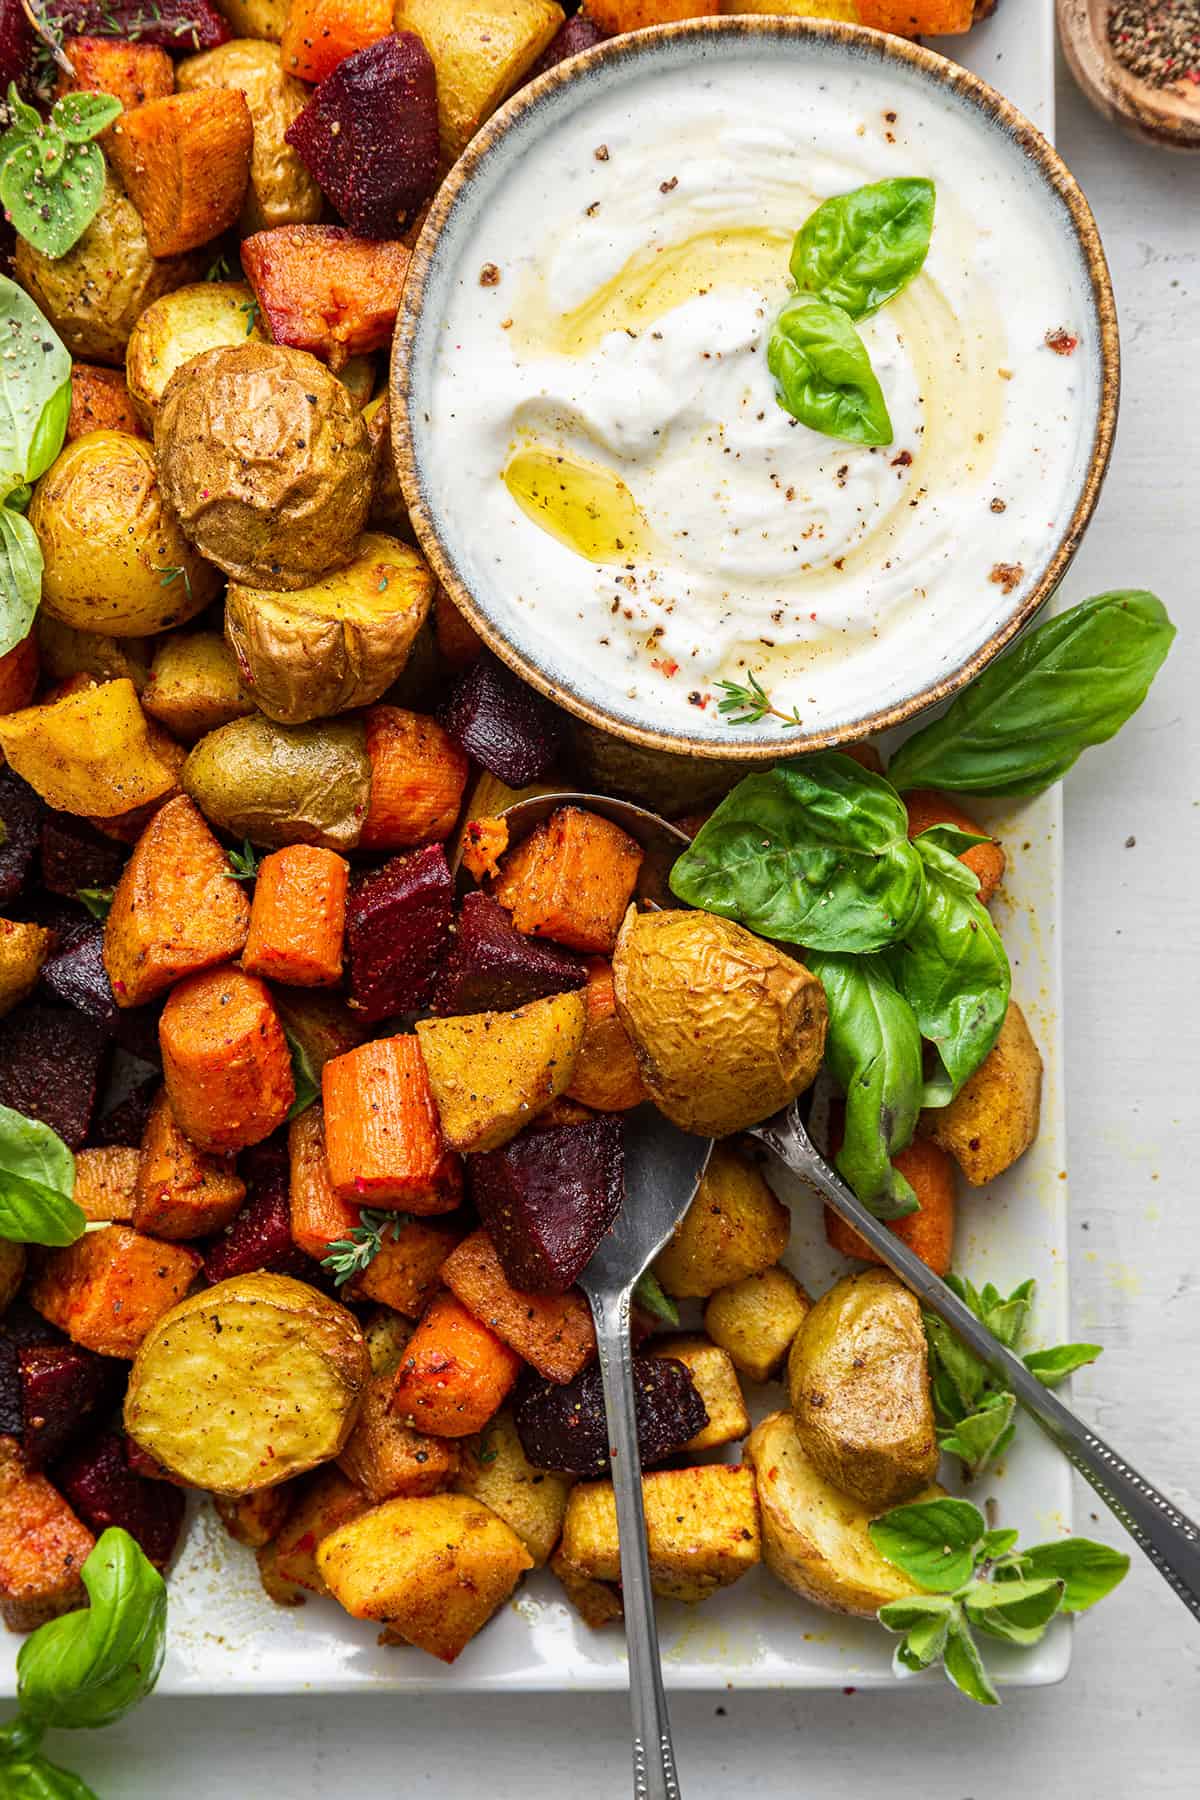 Overhead view of oven-roasted root vegetables on platter with serving spoons and bowl of dip